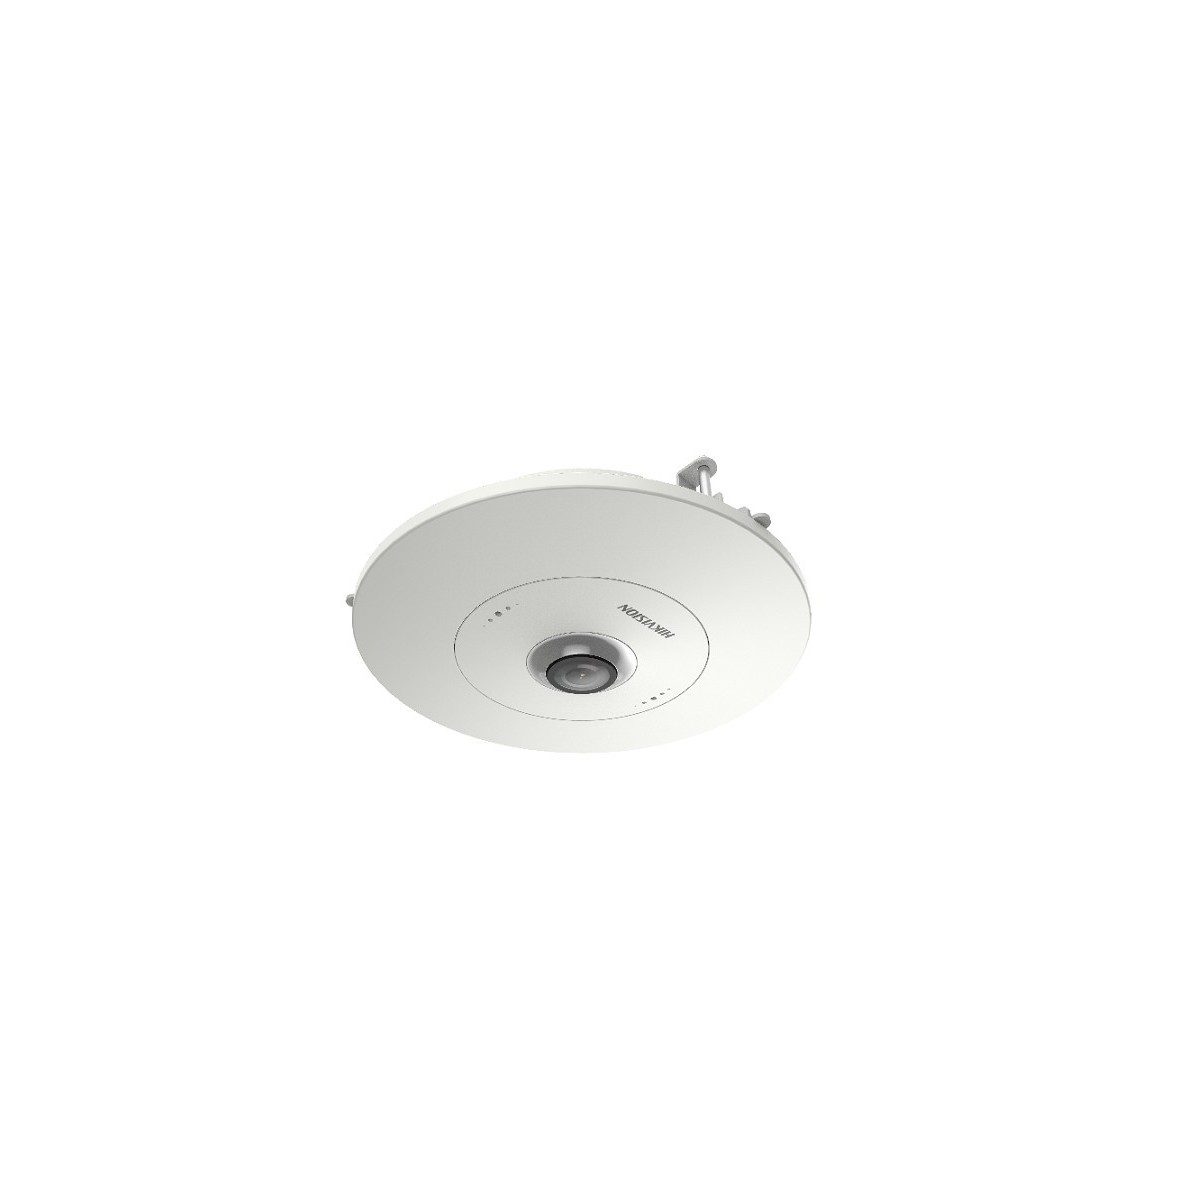 Hikvision Digital Technology DS-2CD6365G0E-S/RC - IP security camera - Indoor - Wired - Ceiling - White - Metal,Plastic